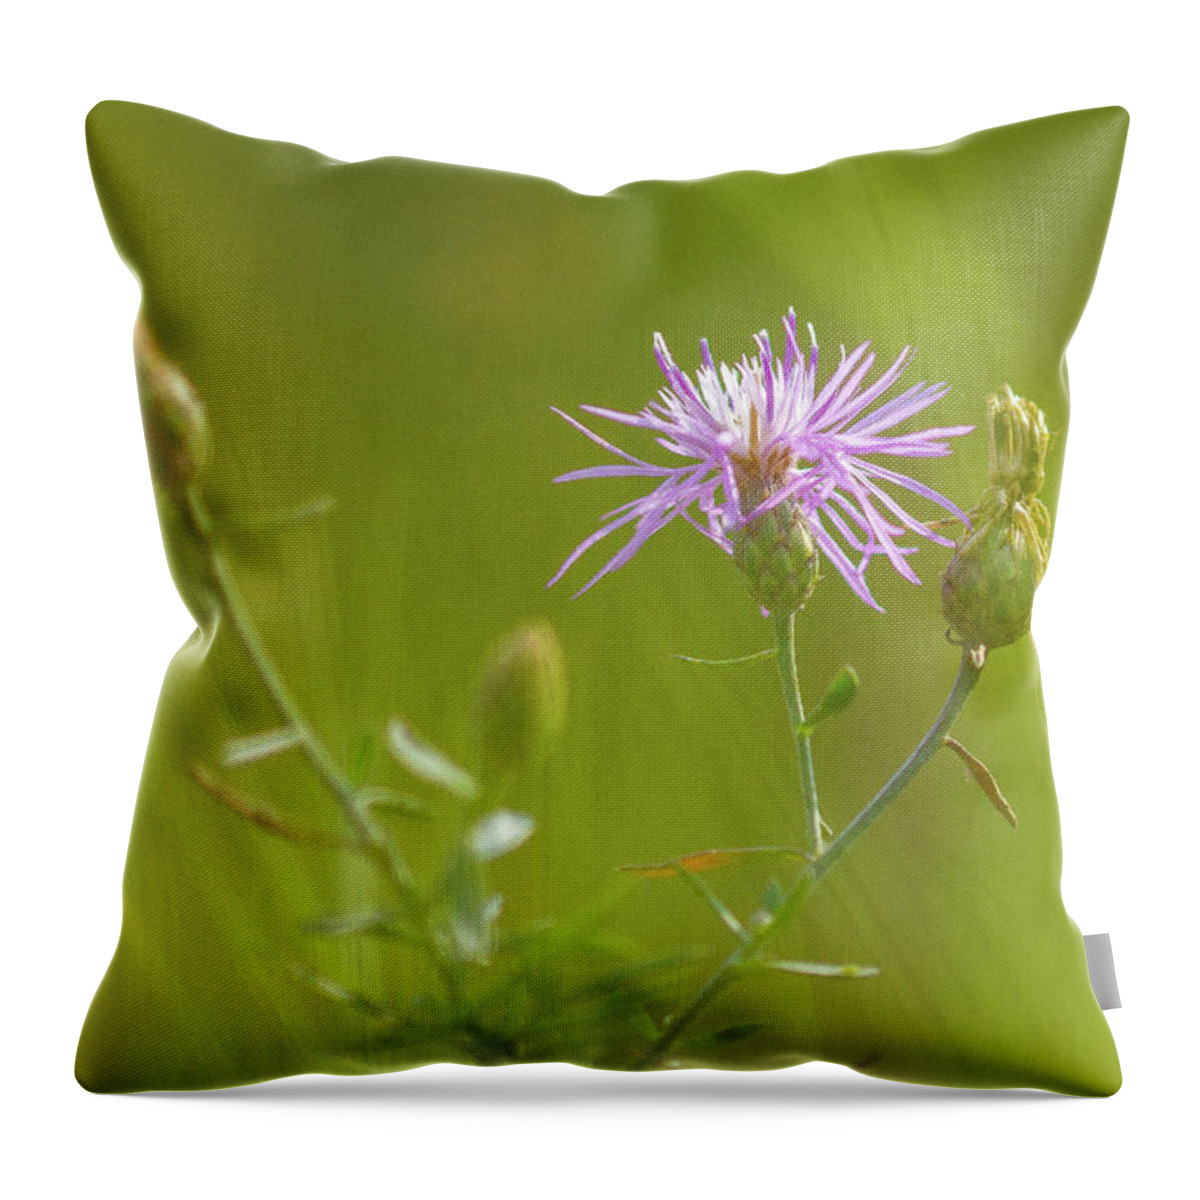 Purple Flower Throw Pillow featuring the photograph Purple Flower by David Morehead